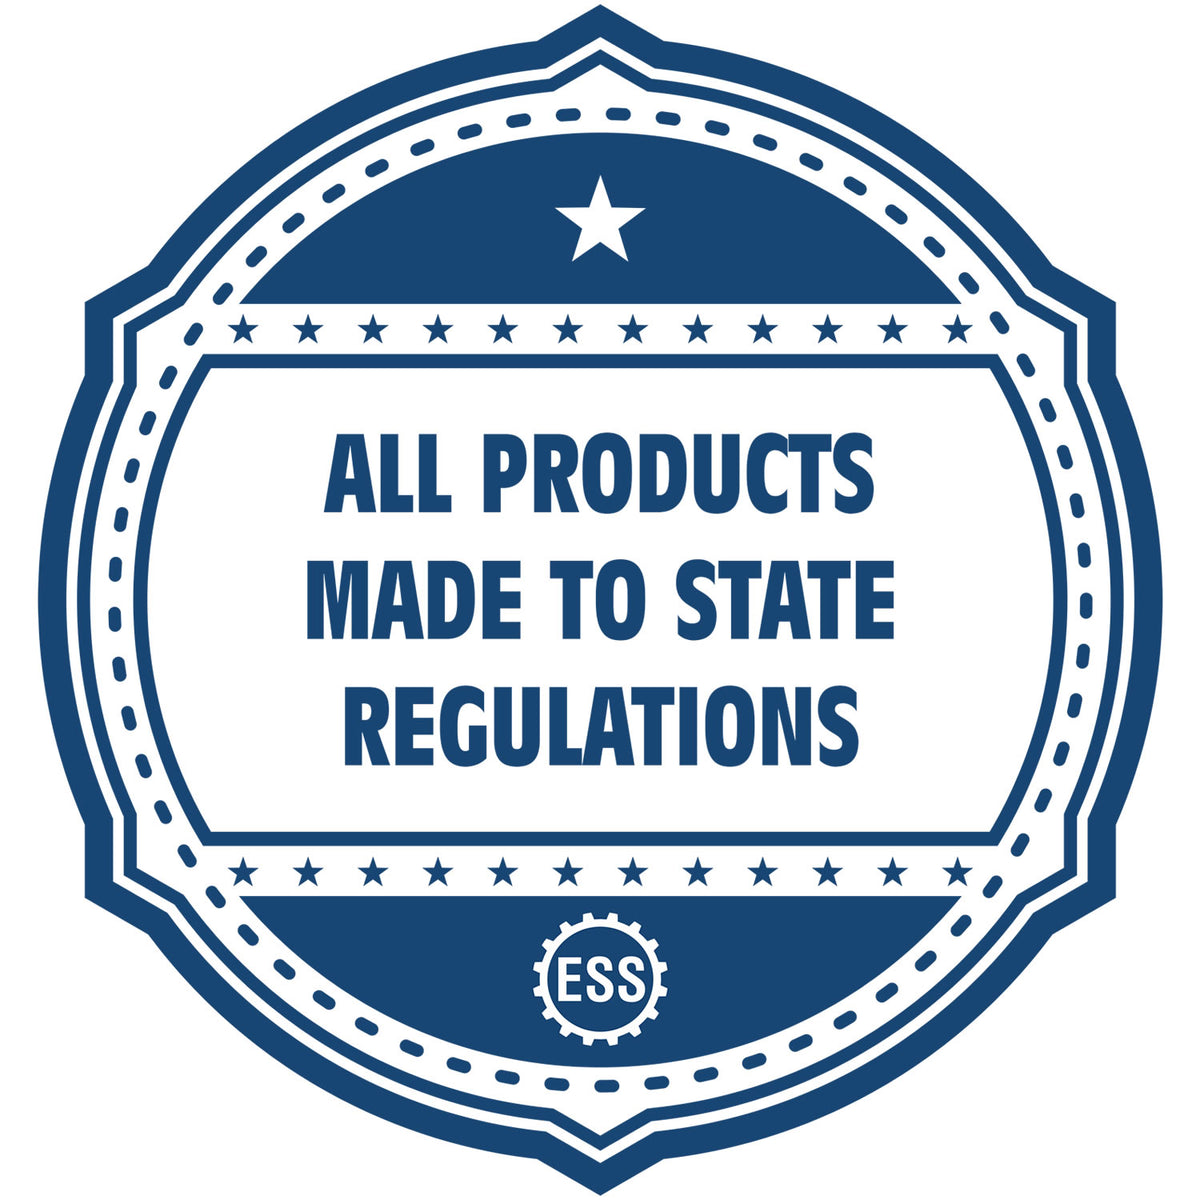 A blue icon or badge for the Self-Inking Nebraska Geologist Stamp showing that this product is made in compliance with state regulations.